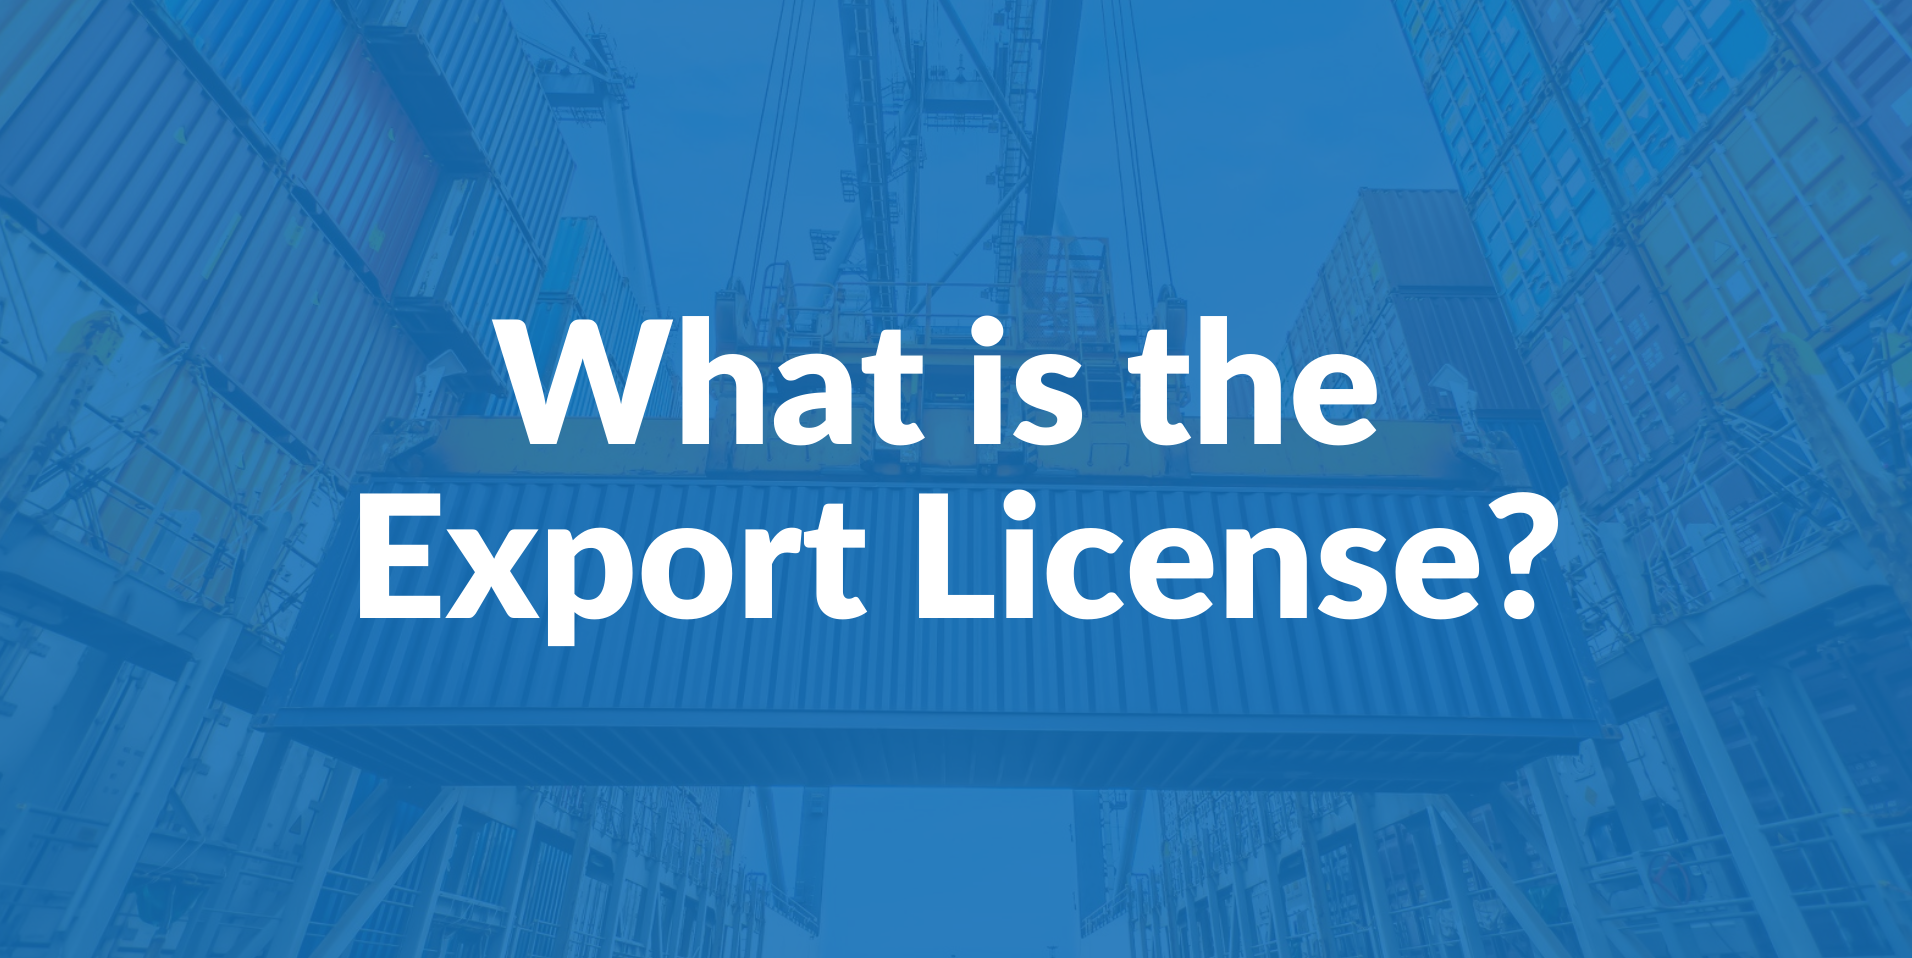 What is an export license and who needs it?